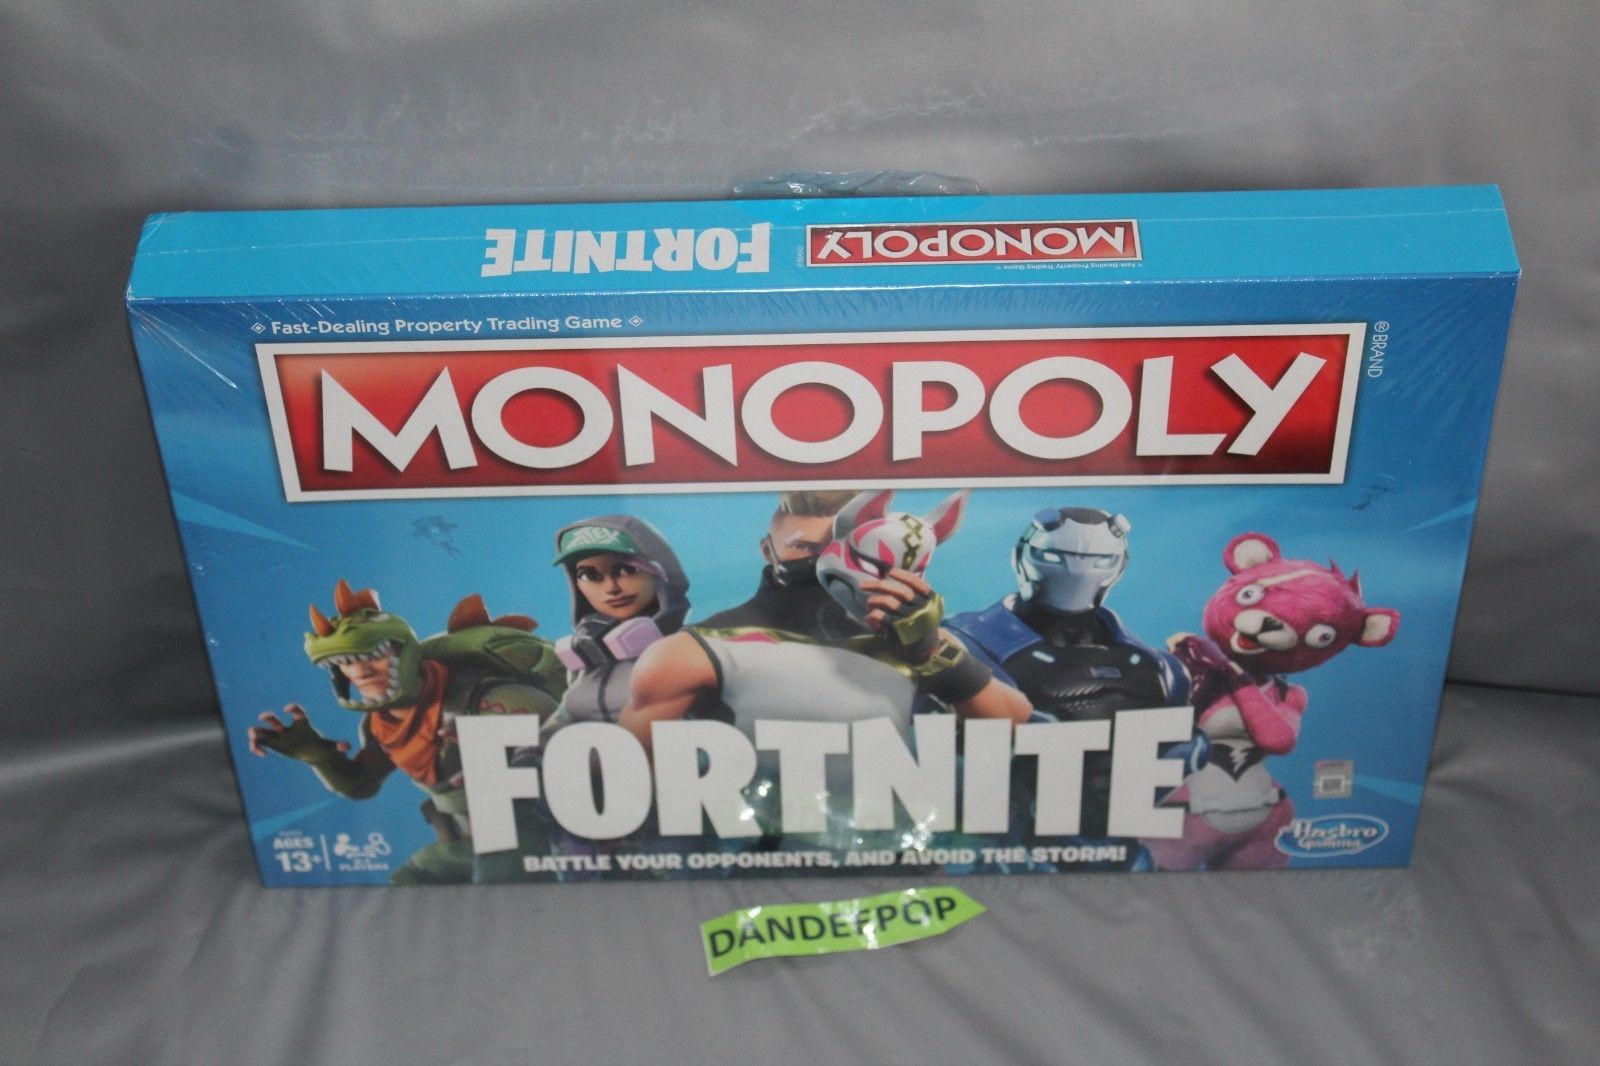 57 - all characters in fortnite monopoly